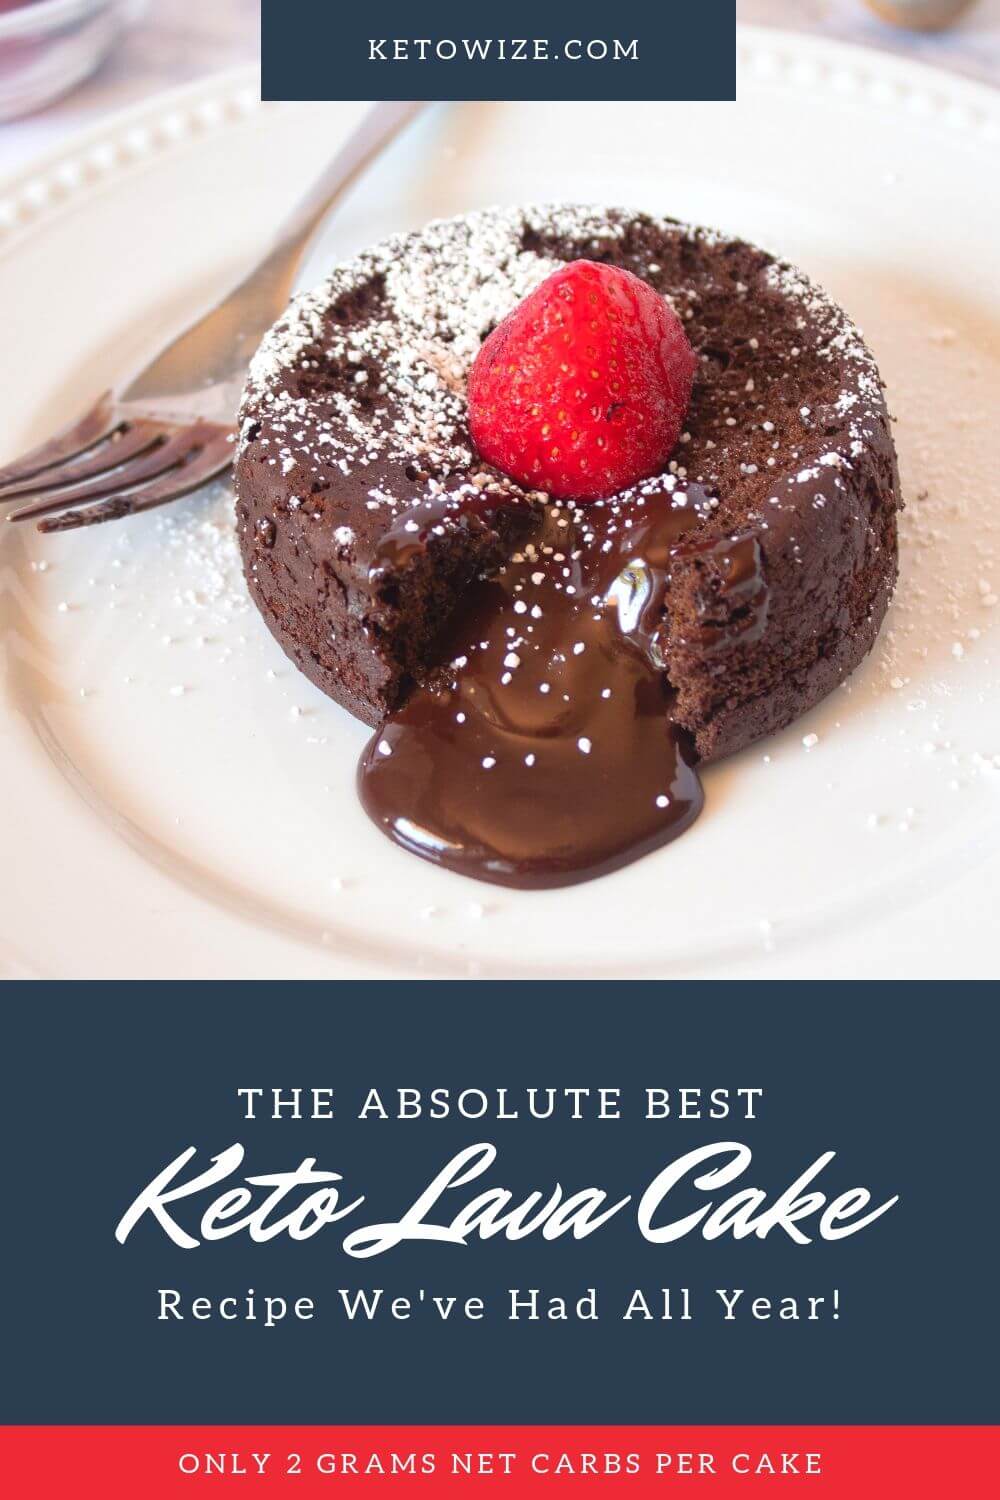 The absolute best Keto Lava Cake recipe we've had all year! Only 2 grams net carbs per cake.